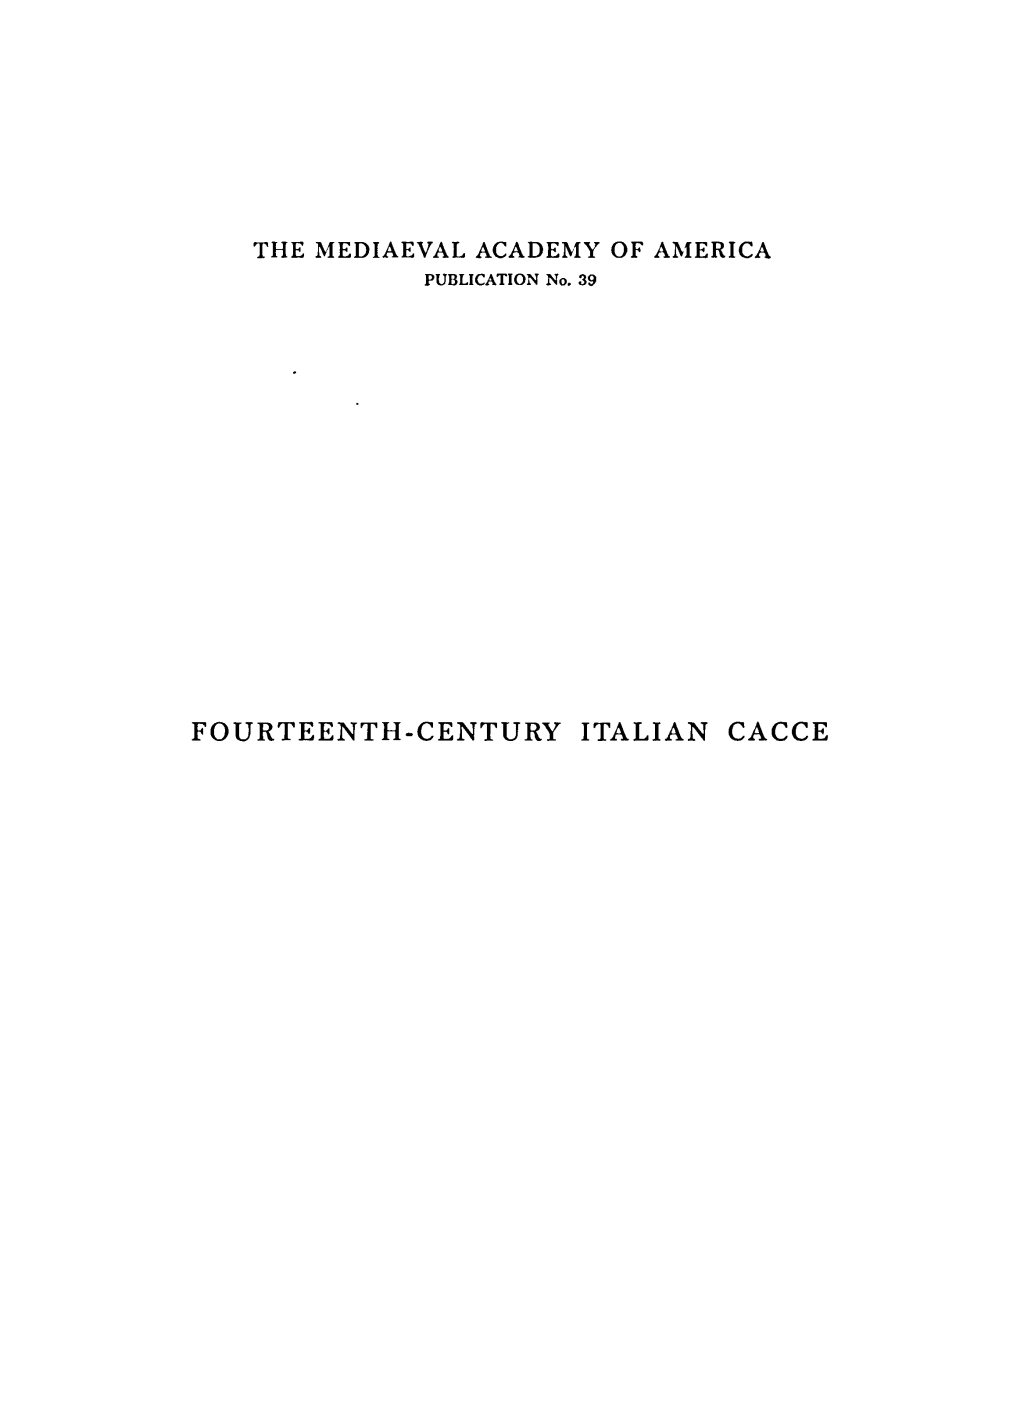 Fourteenth-Century Italian Cacce. Edited by WT MARROCCO. Second